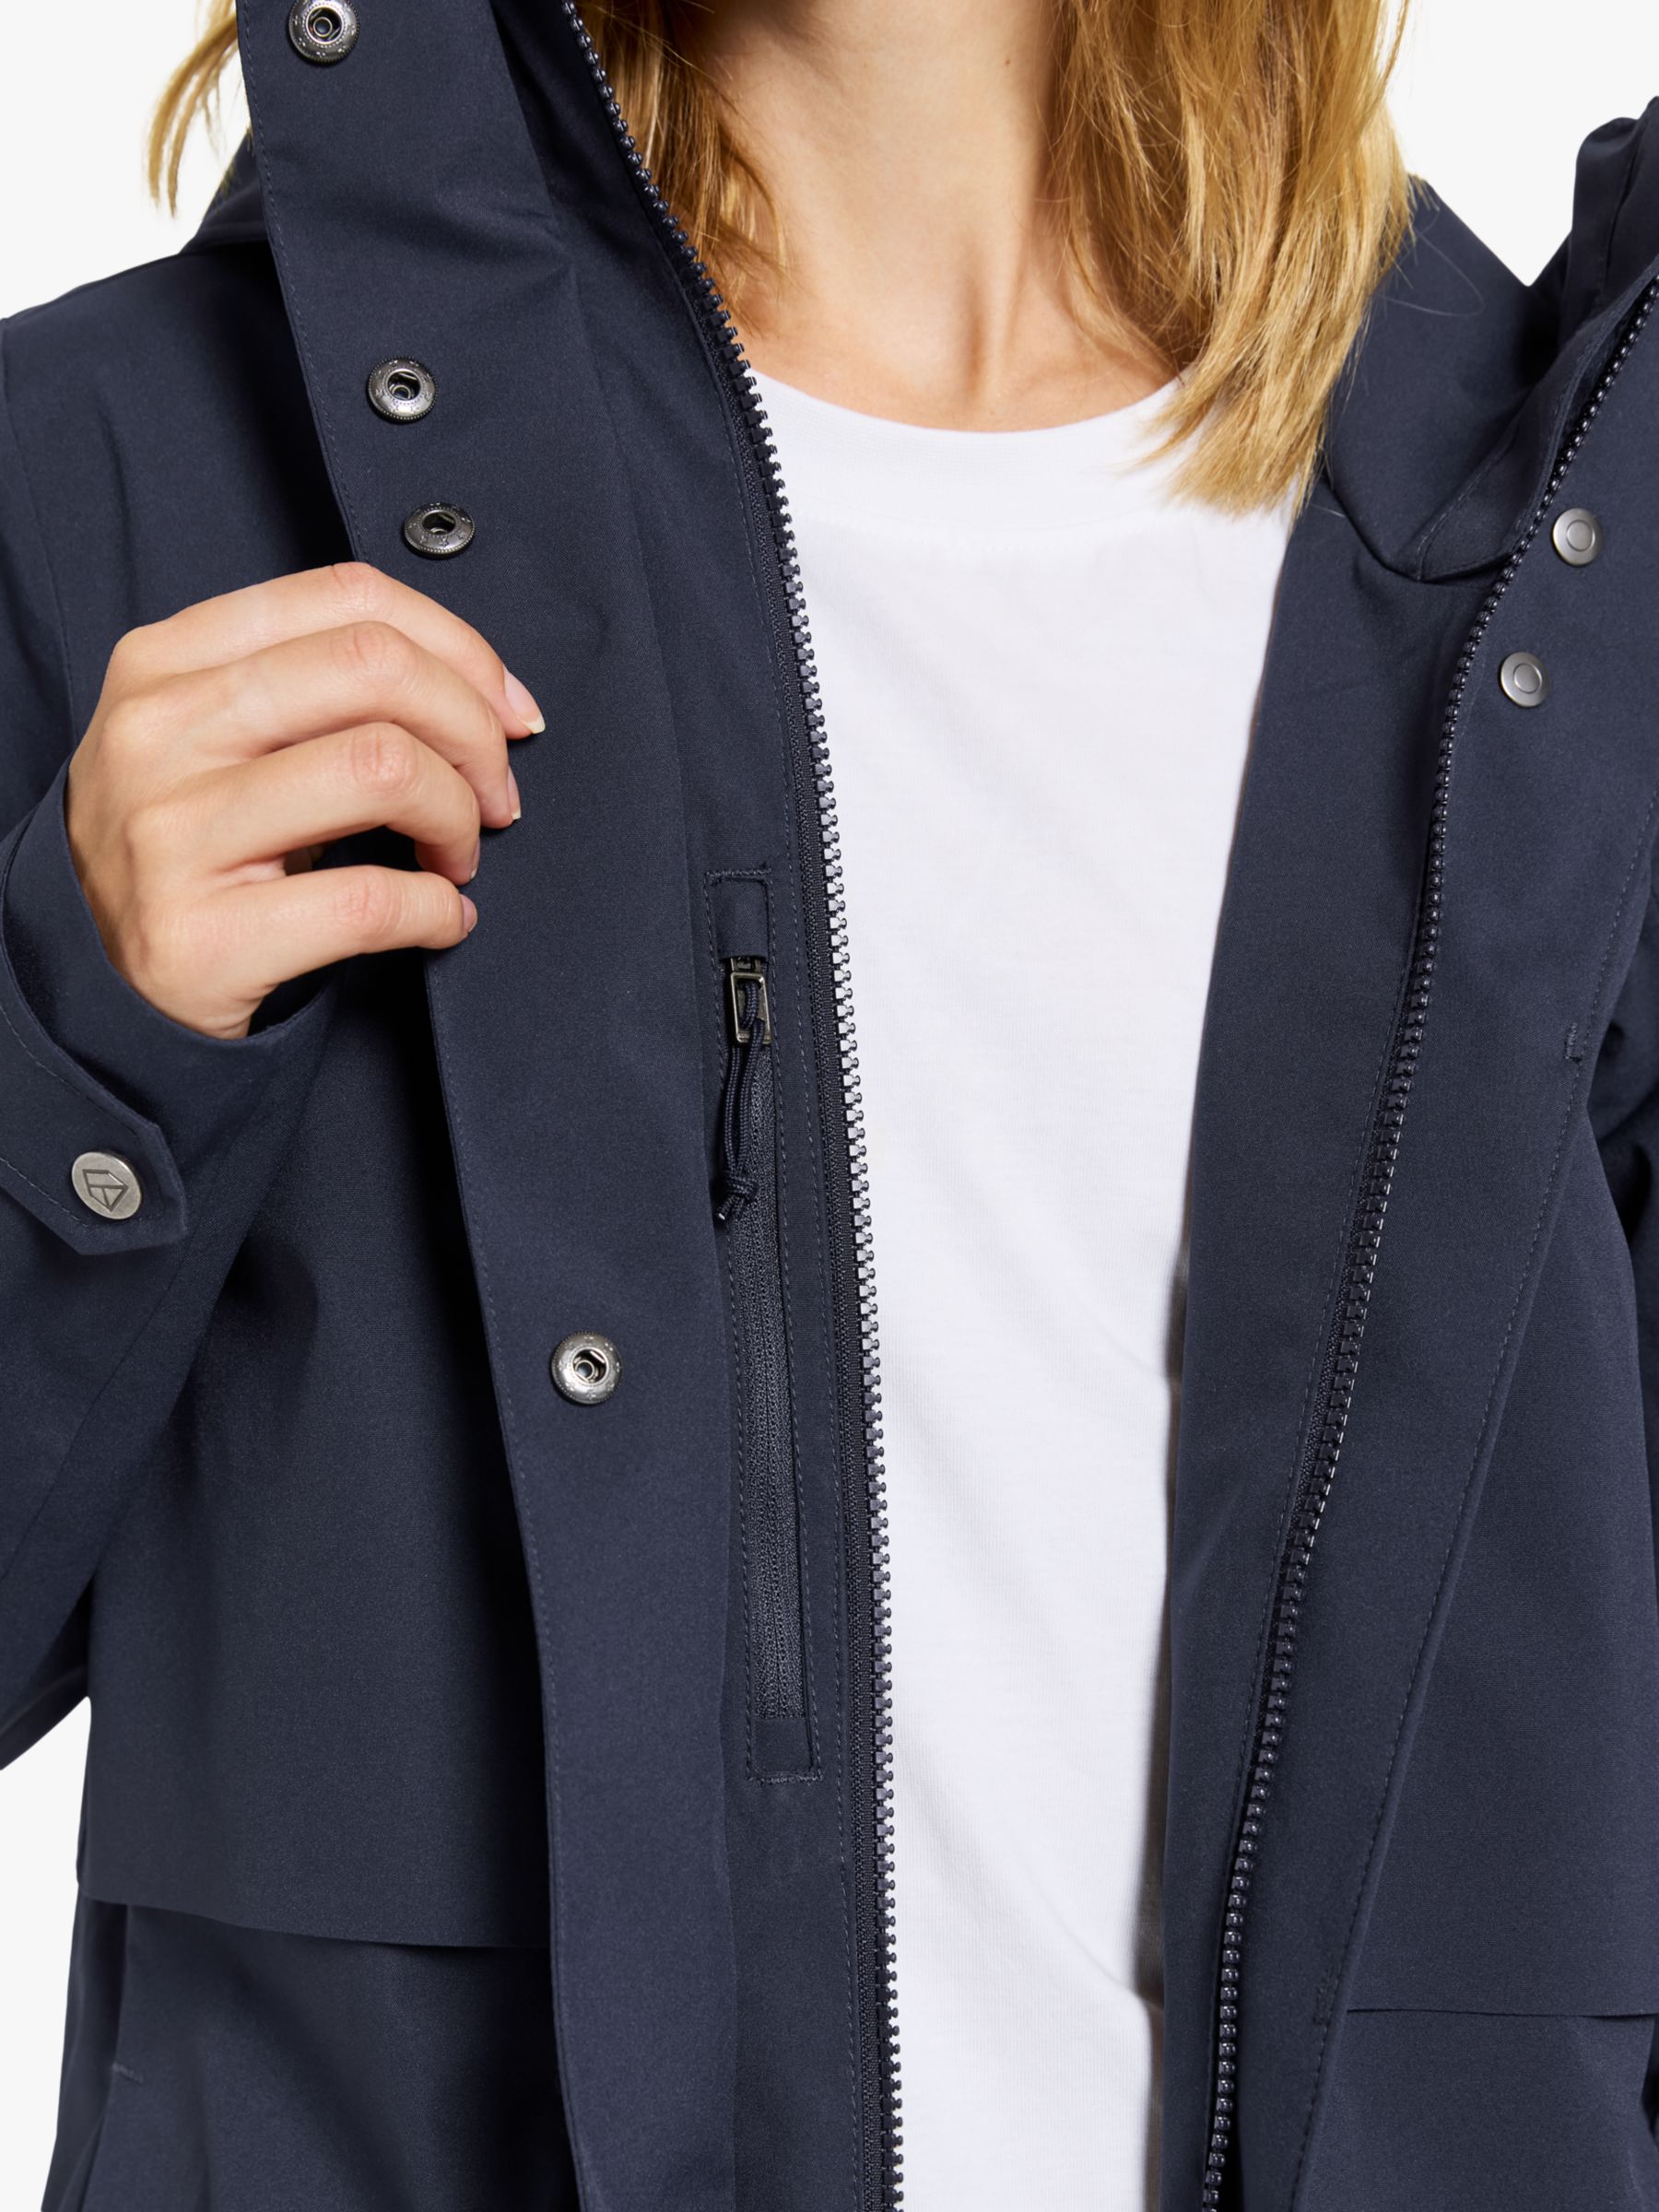 Buy Didriksons Edith Parka Jacket Online at johnlewis.com